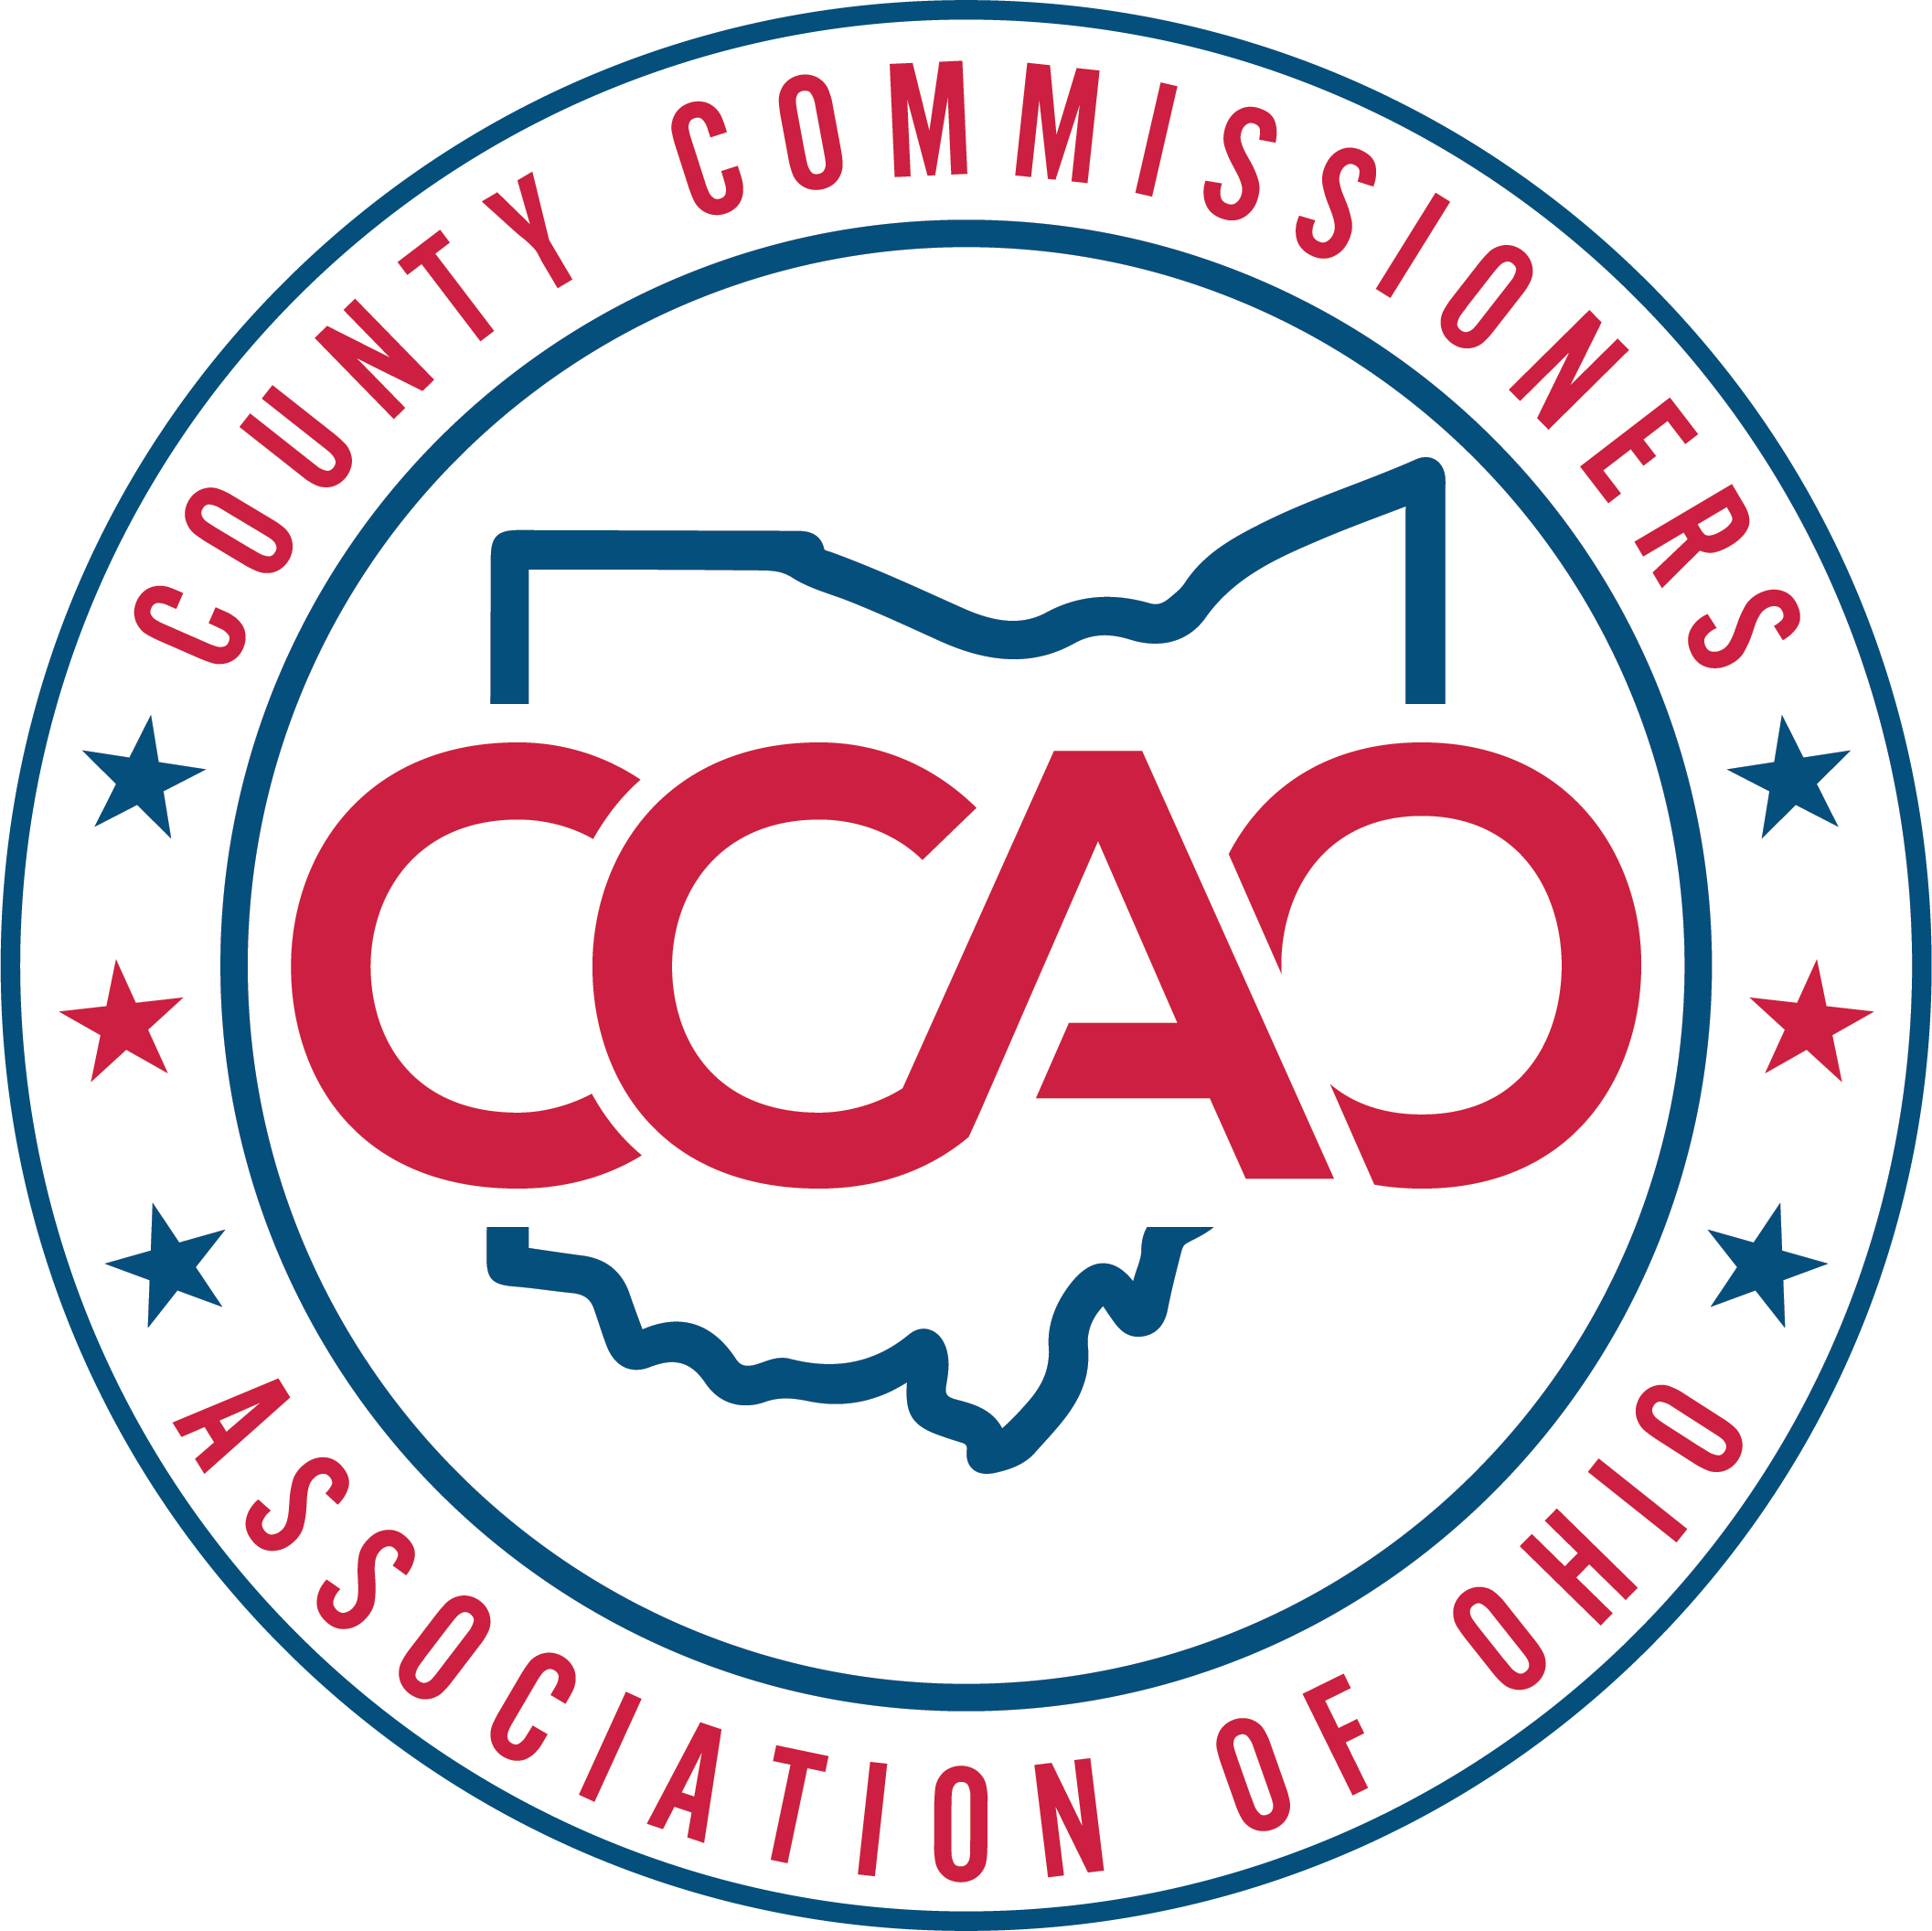 Nominations for CCAO Officers and Board of Directors